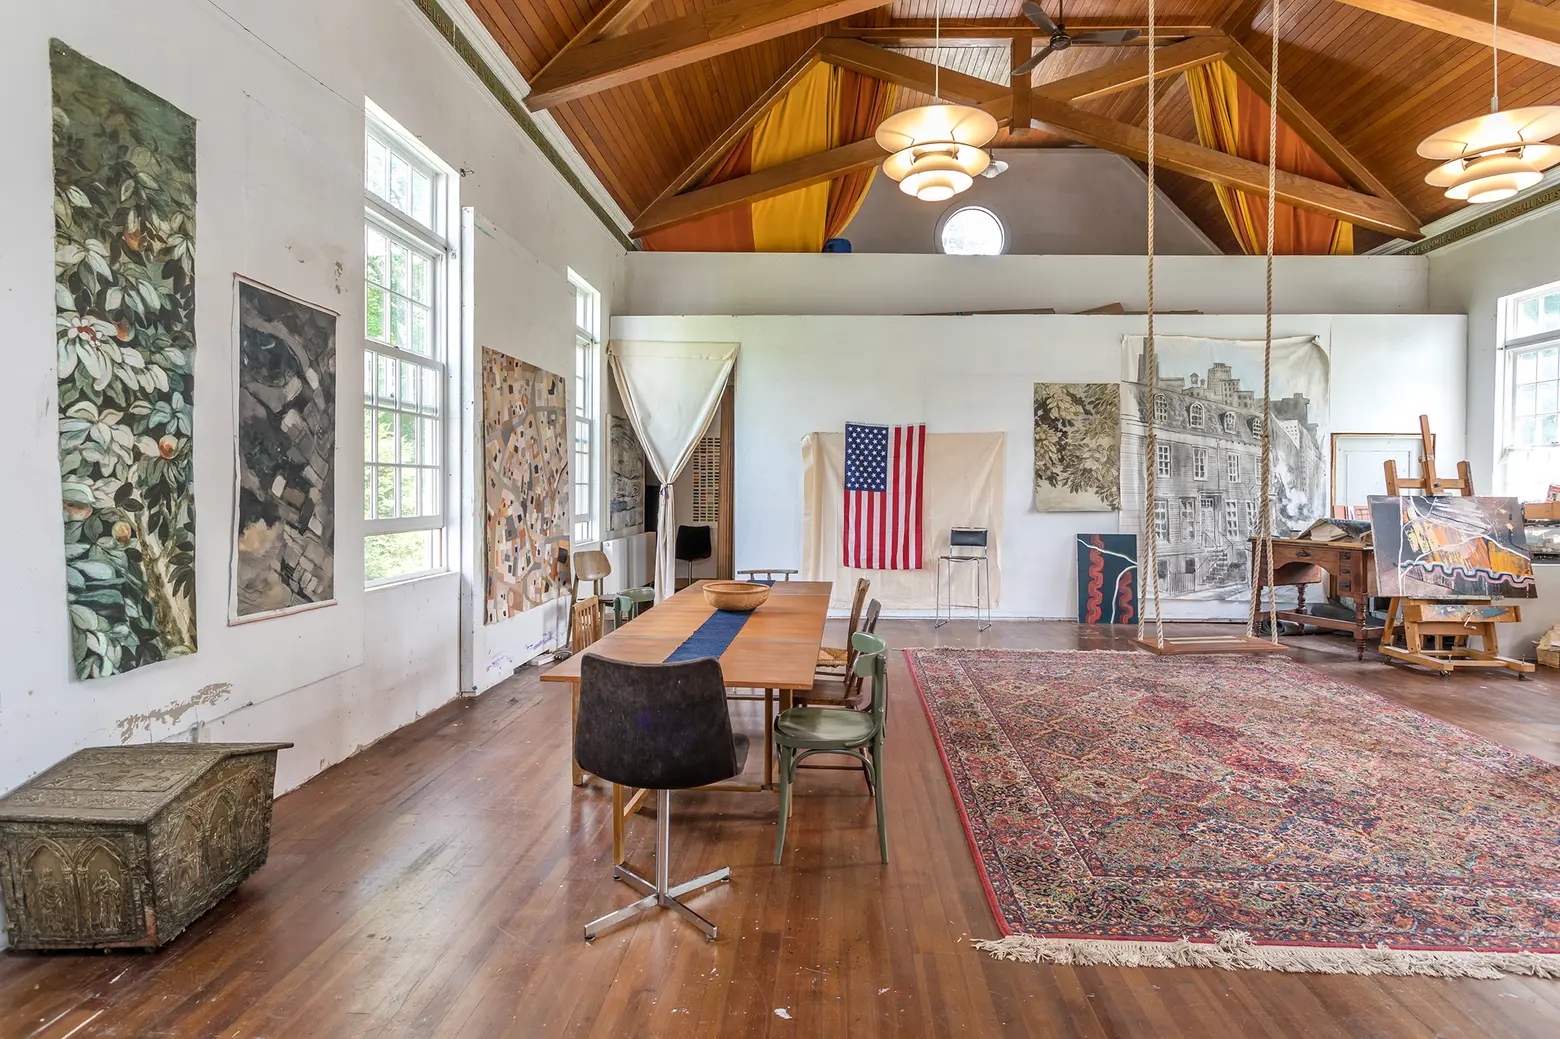 Asking $525K, this historic Connecticut church conversion is the perfect creative sanctuary